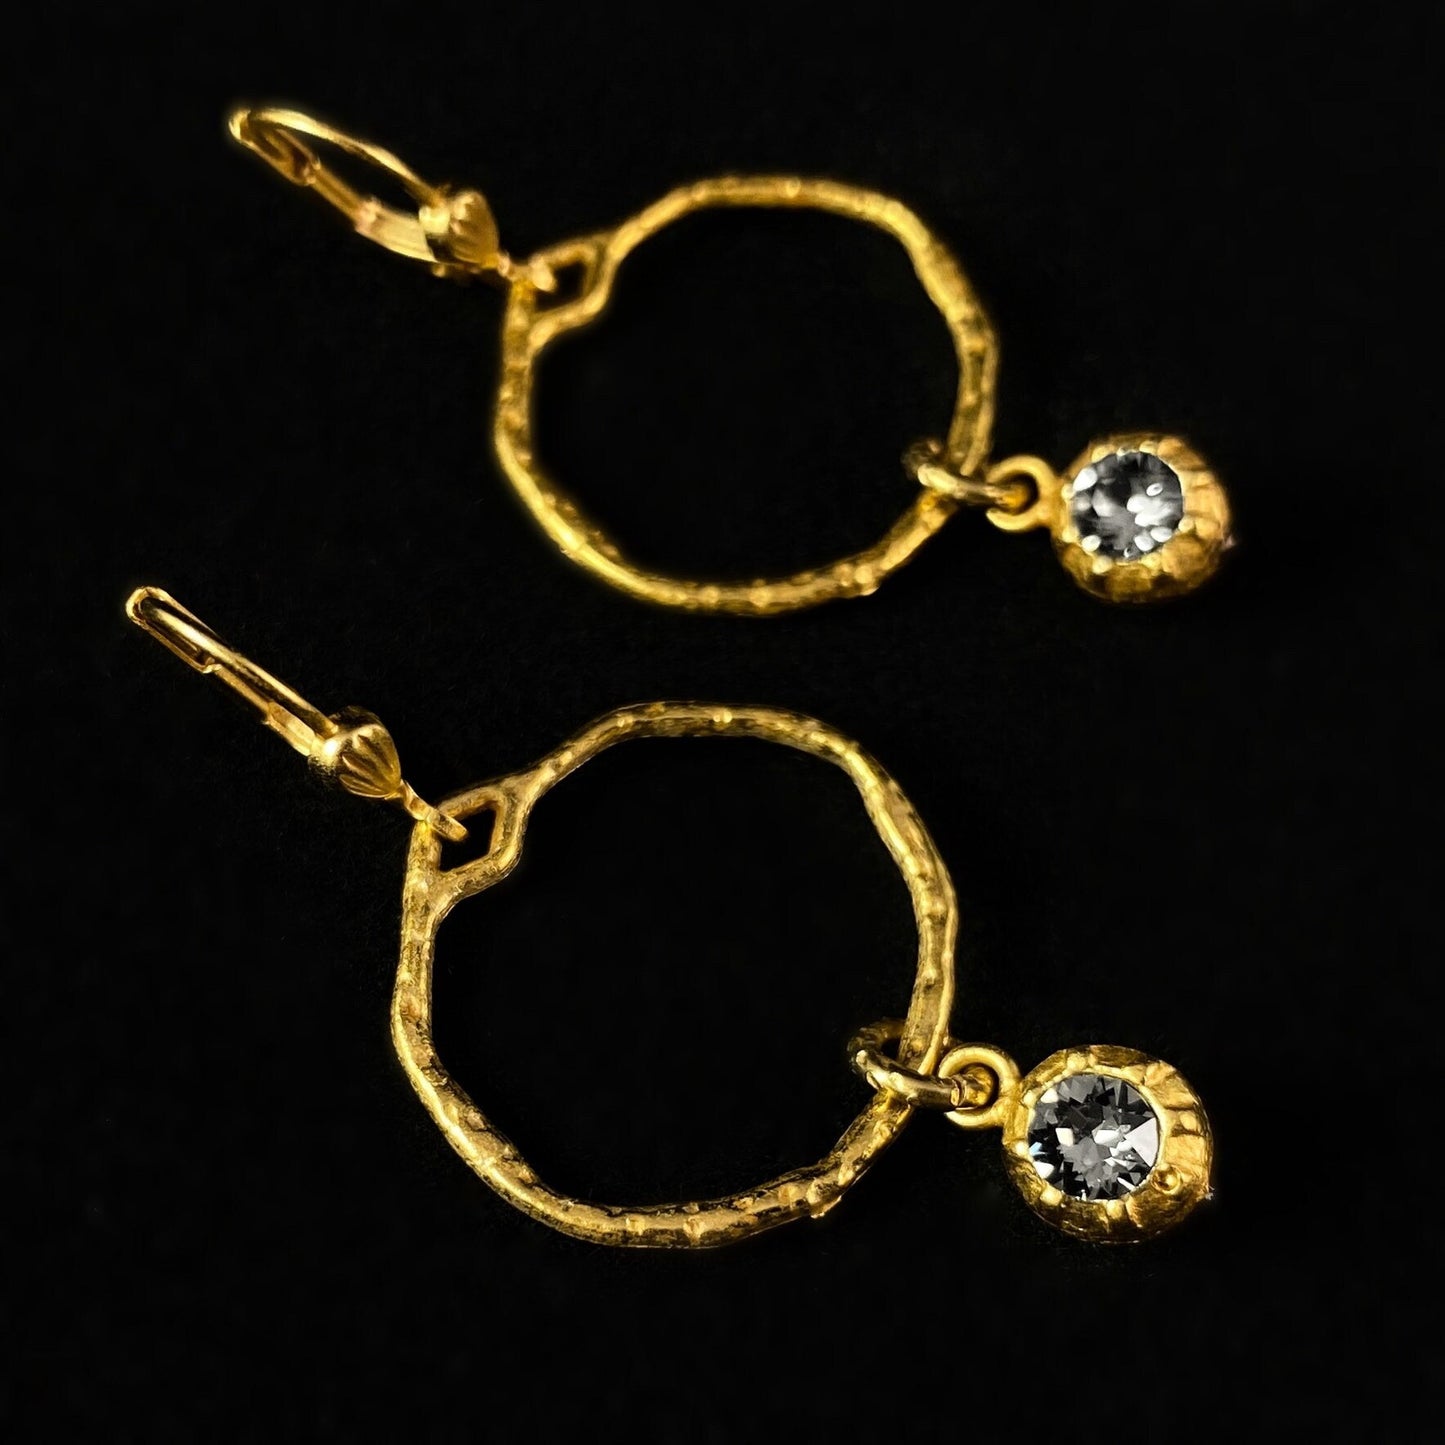 Hammered Gold Hoop with Smoky Clear Swarovski Crystal Earrings - La Vie Parisienne by Catherine Popesco